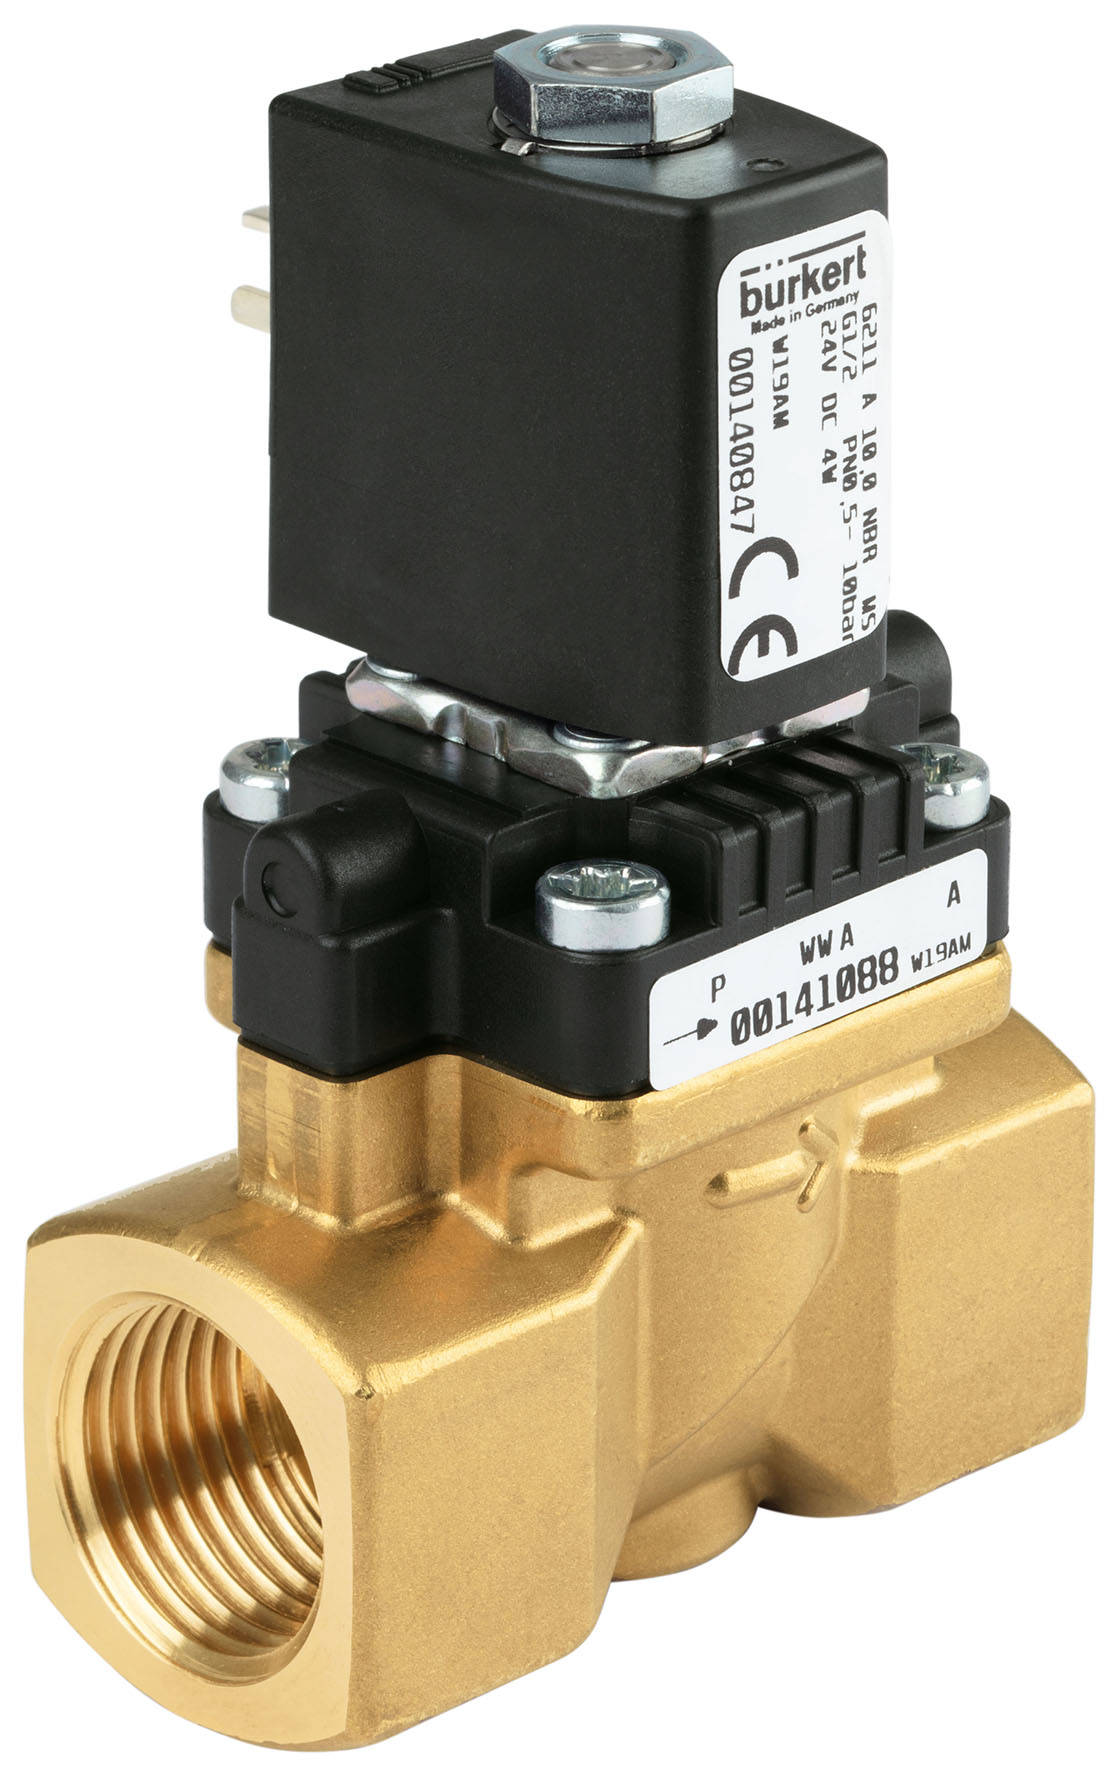 Today, Bürkert supplies EmTech with approximately 1,300 solenoid valves per year, typically 24VDC models, as well as 230V valves required for customer upgrades implemented by EmTech on older, third-party machines.